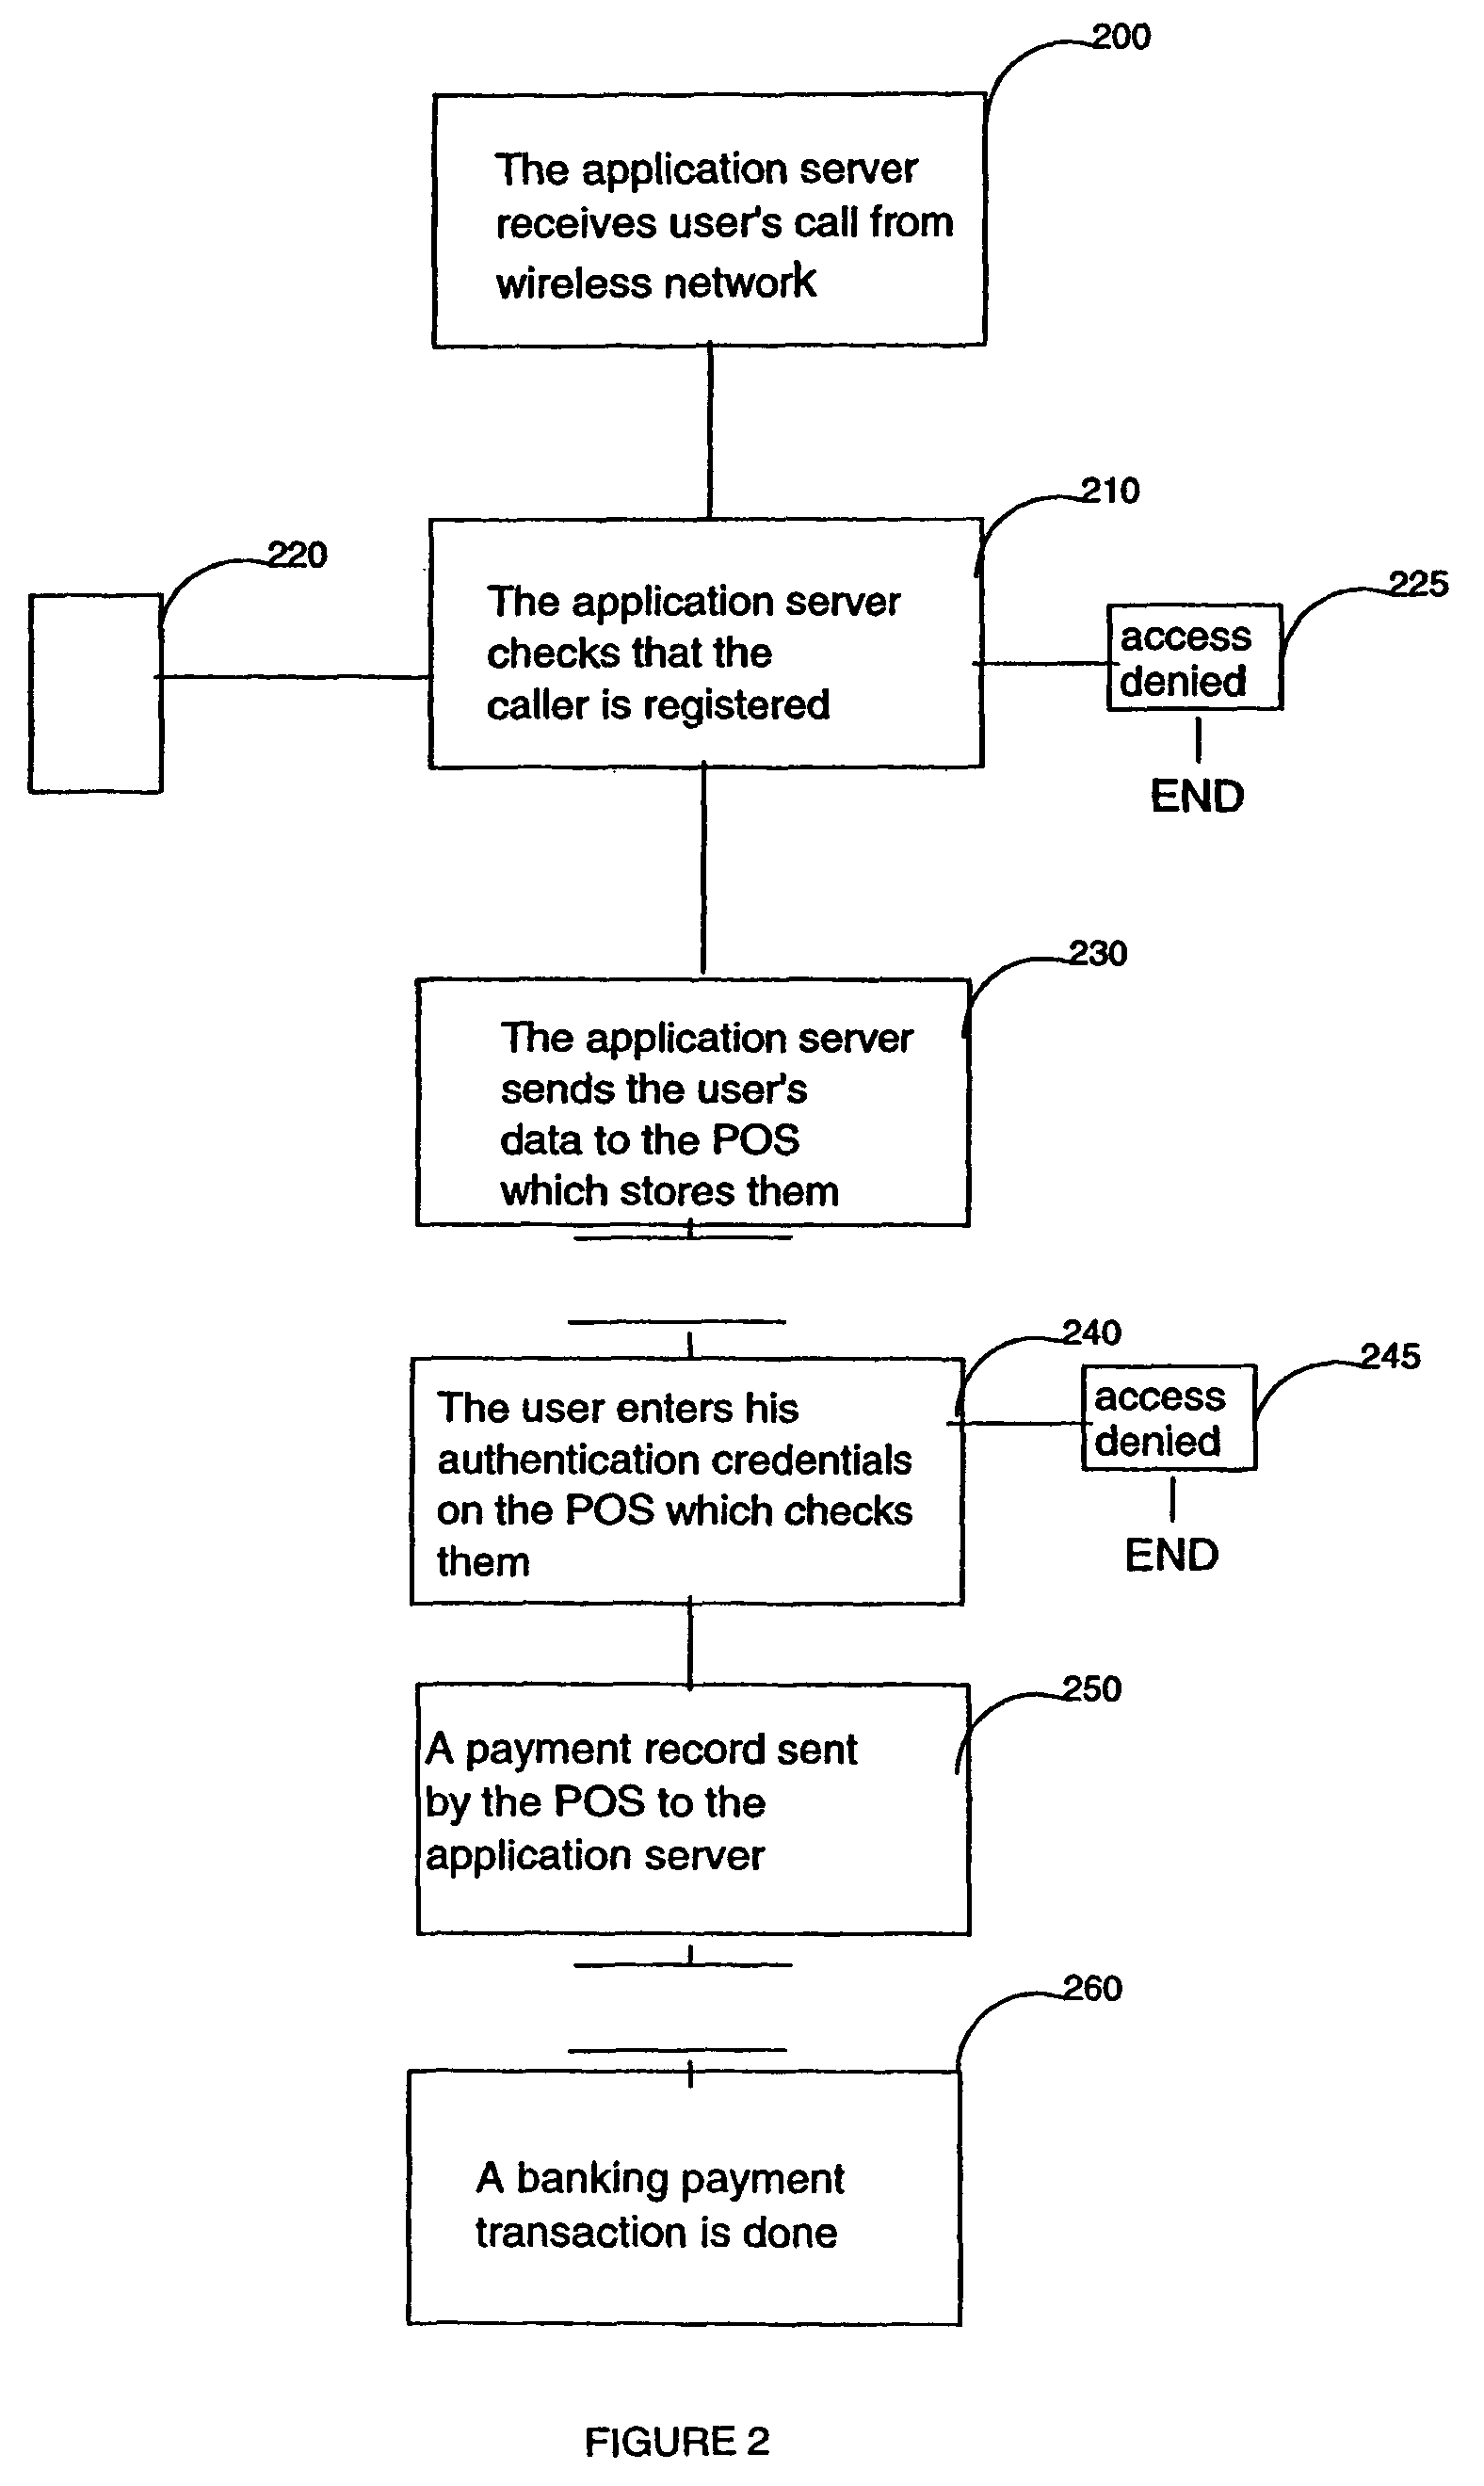 Method and system for secured transactions over a wireless network